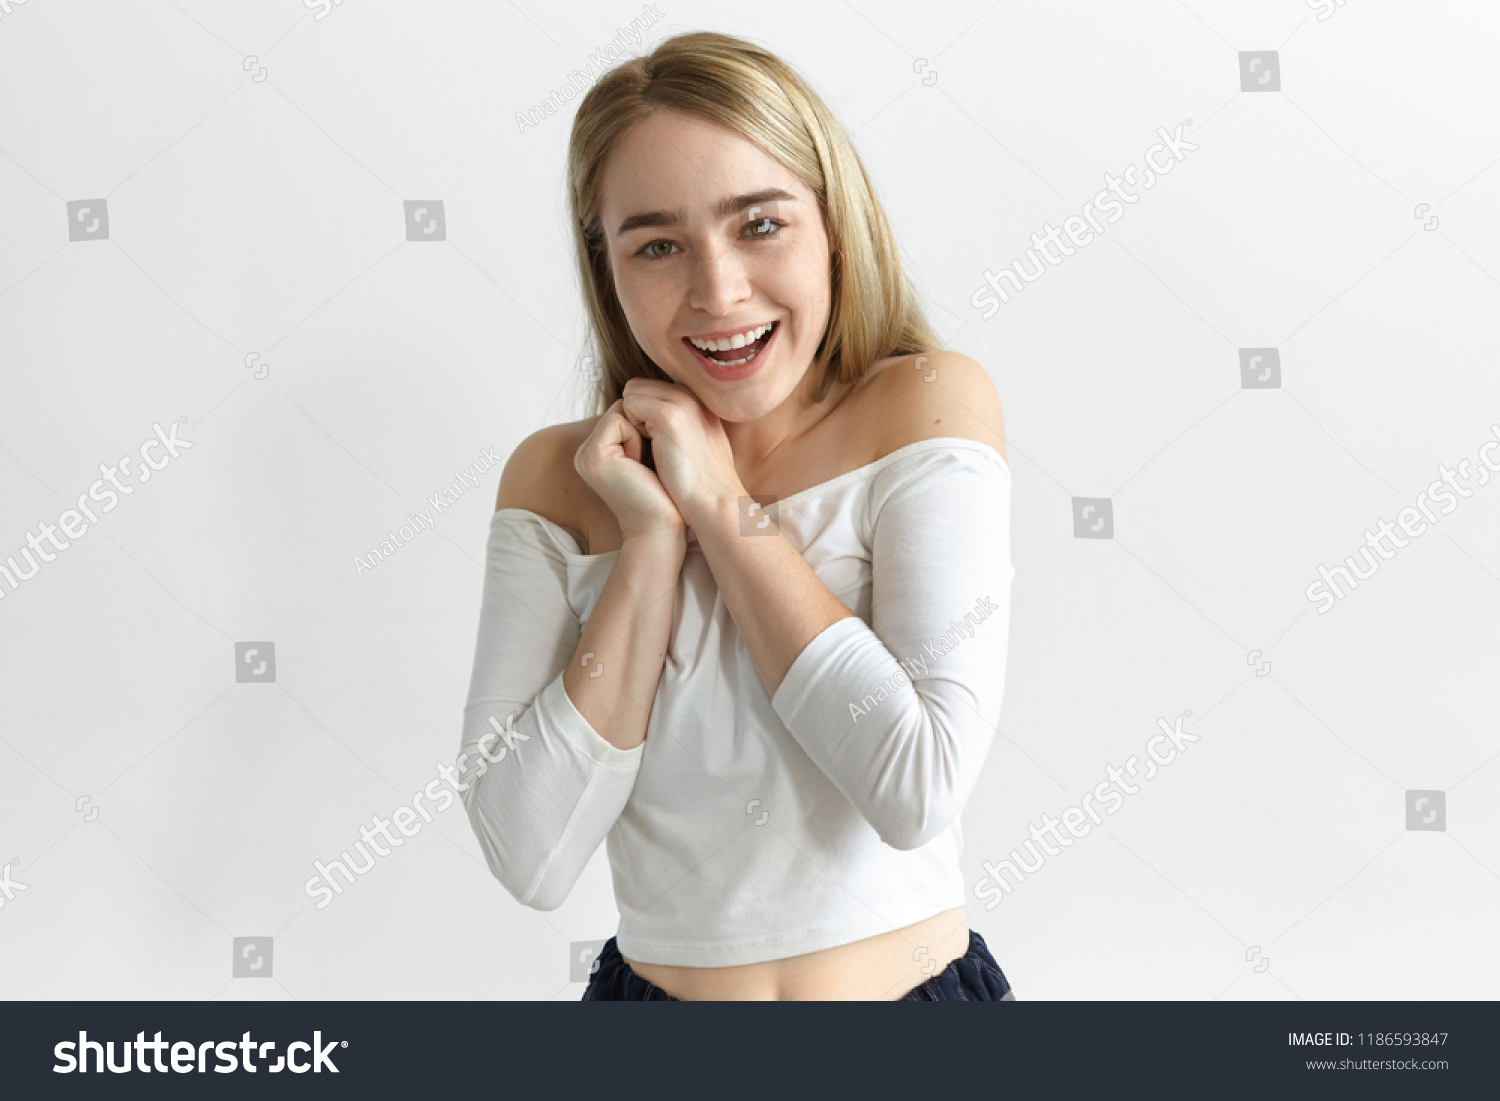 Positive human reaction, feelings, attitude and emotions. Picture of adorable excited young fashionable woman expressing joy and amazement, fascinated with good news, being finally promoted at work #1186593847